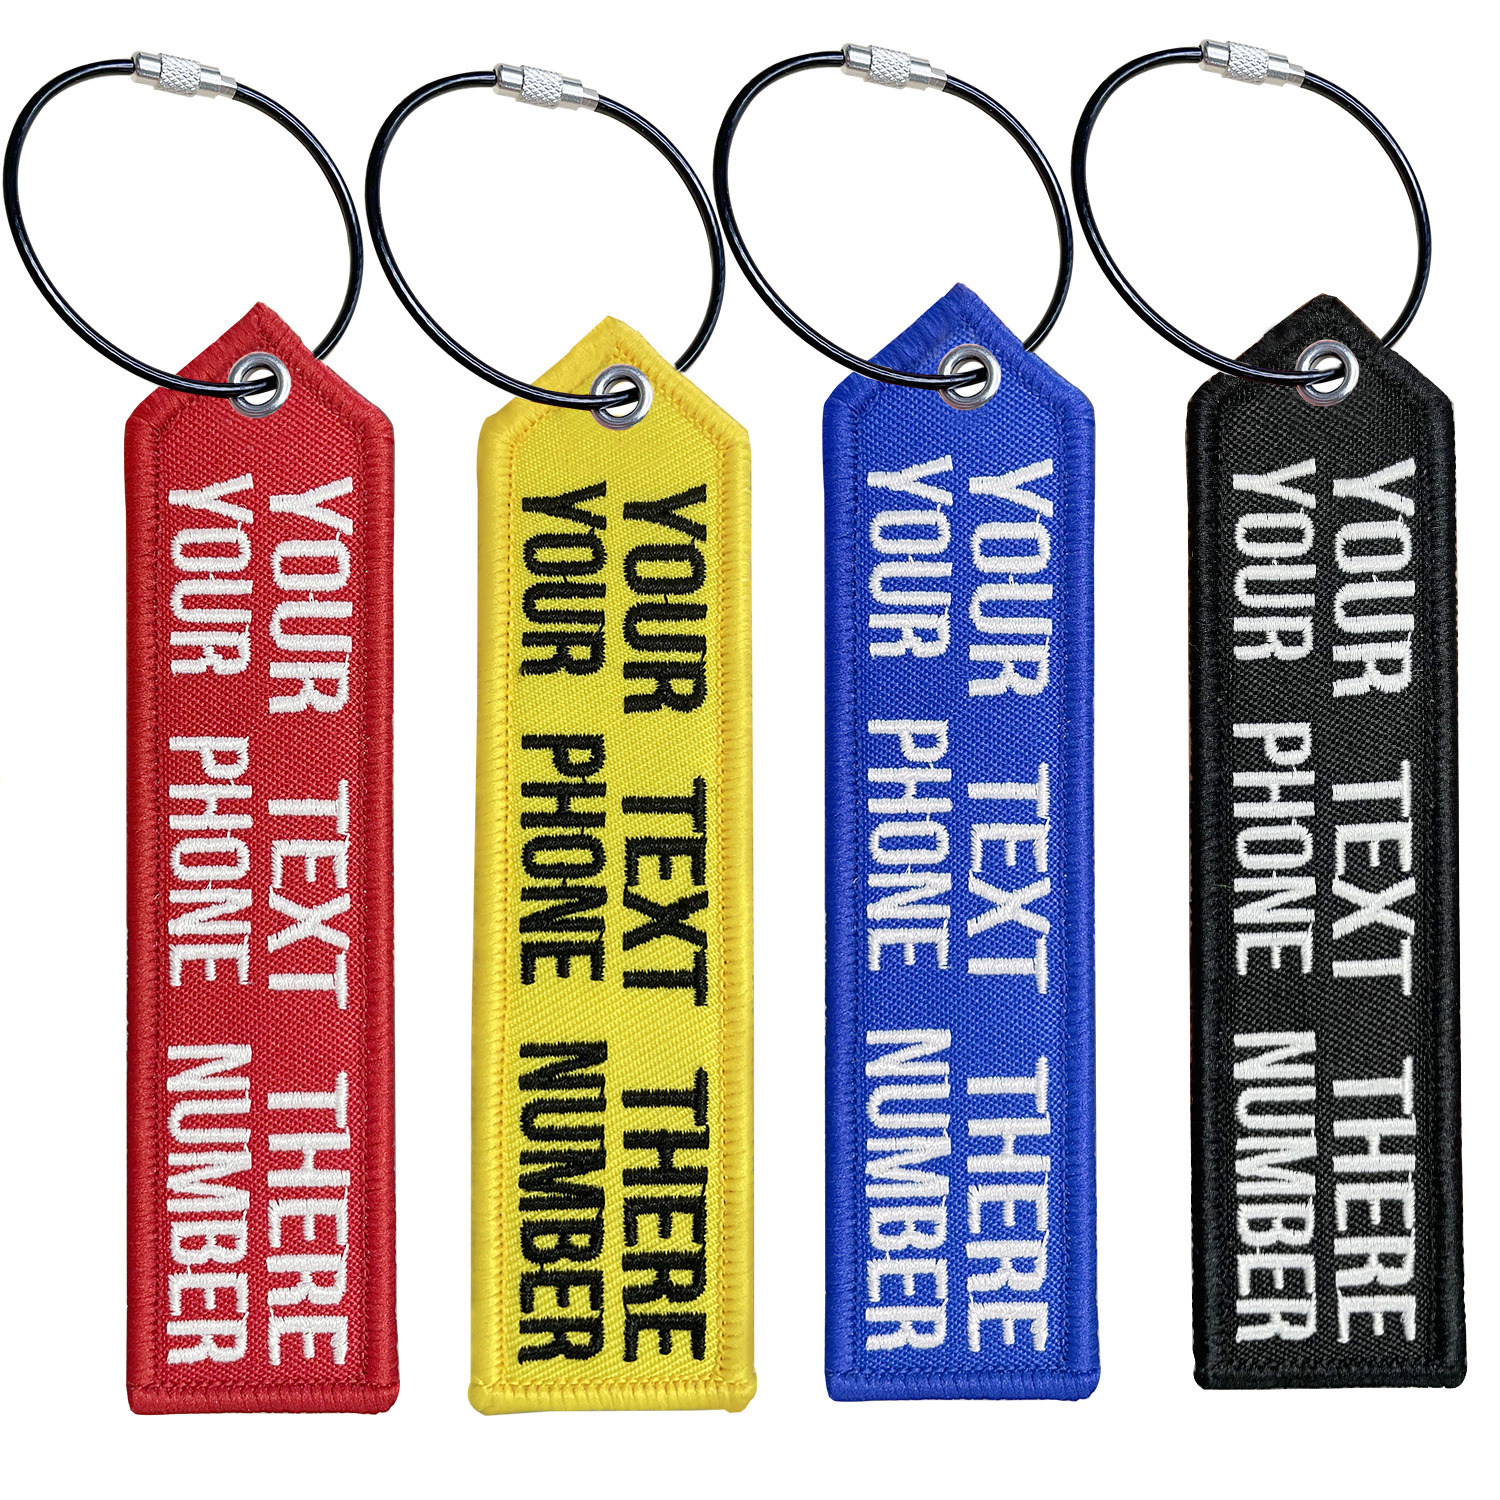 Personalized Keychain Luggage Tag Suitcase Travel Label Double-sided Embroidered